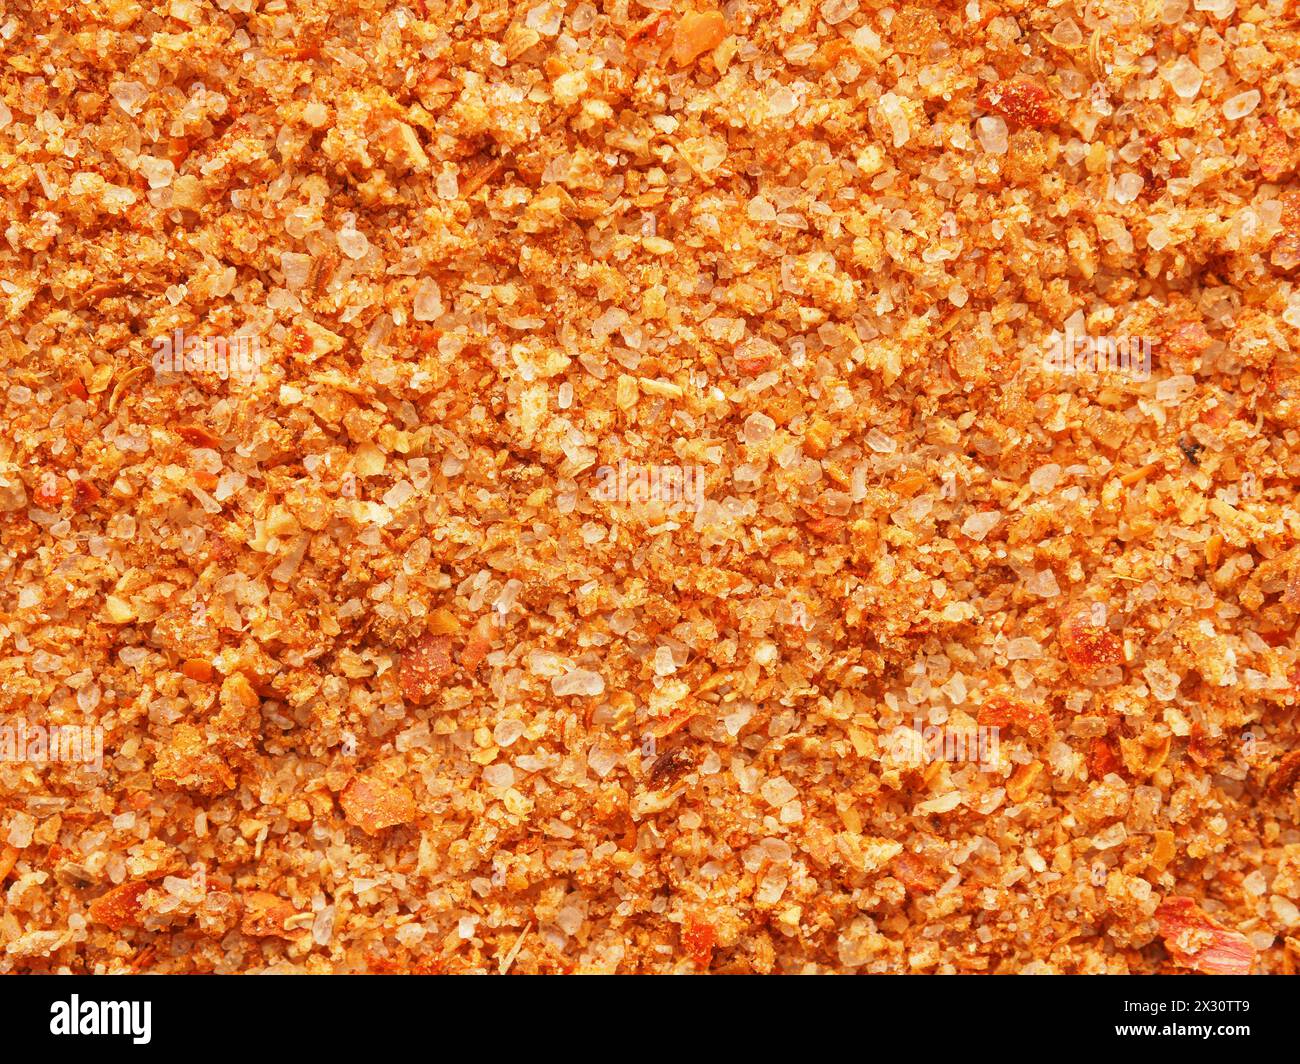 Spicy salt texture using as background or header, cooking ingredients and spices  RECORD DATE NOT STATED Stock Photo